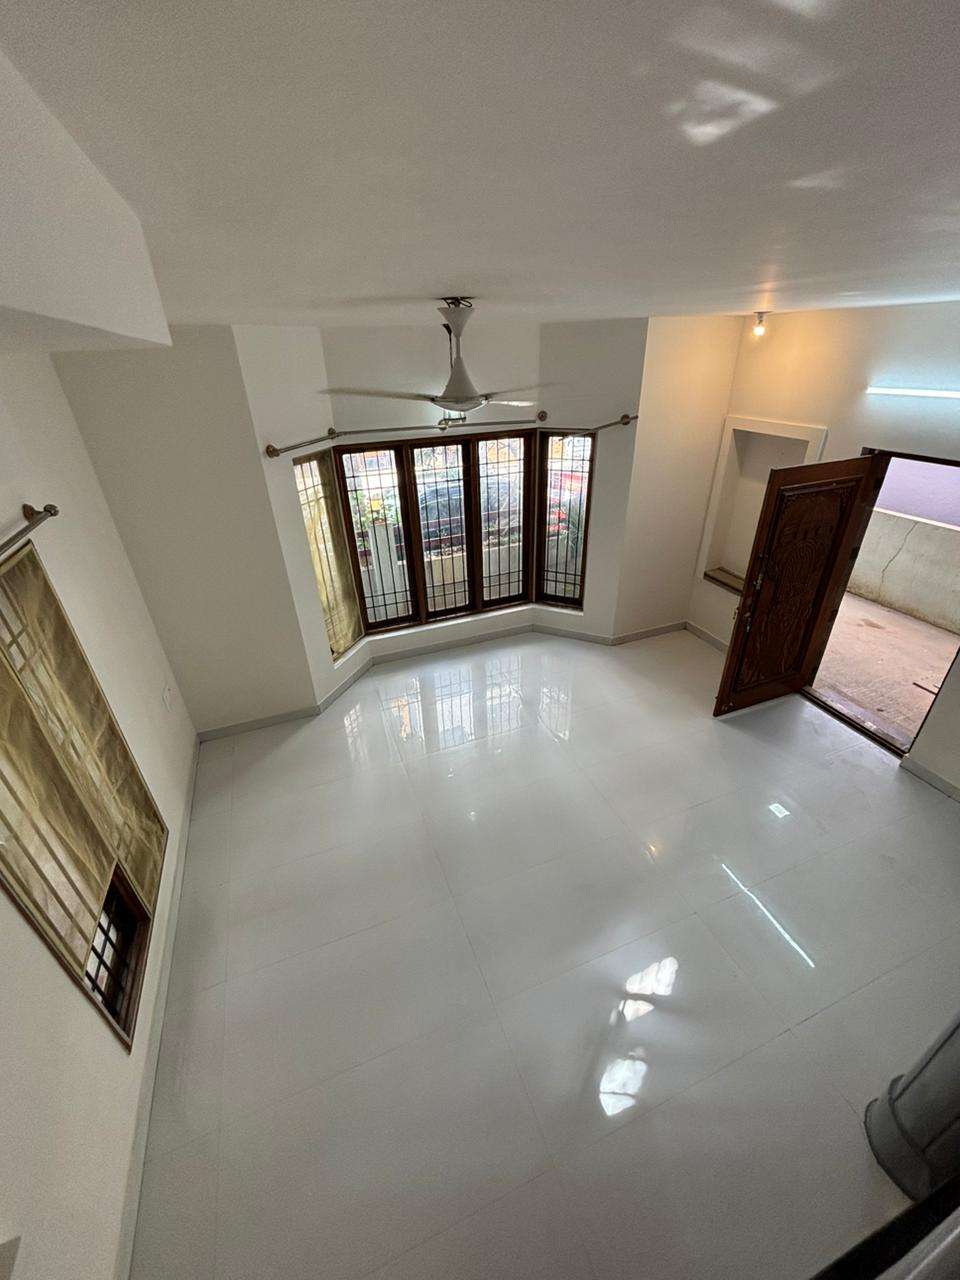 3 BHK Independent House For Rent in Kodihalli Bangalore 6674945